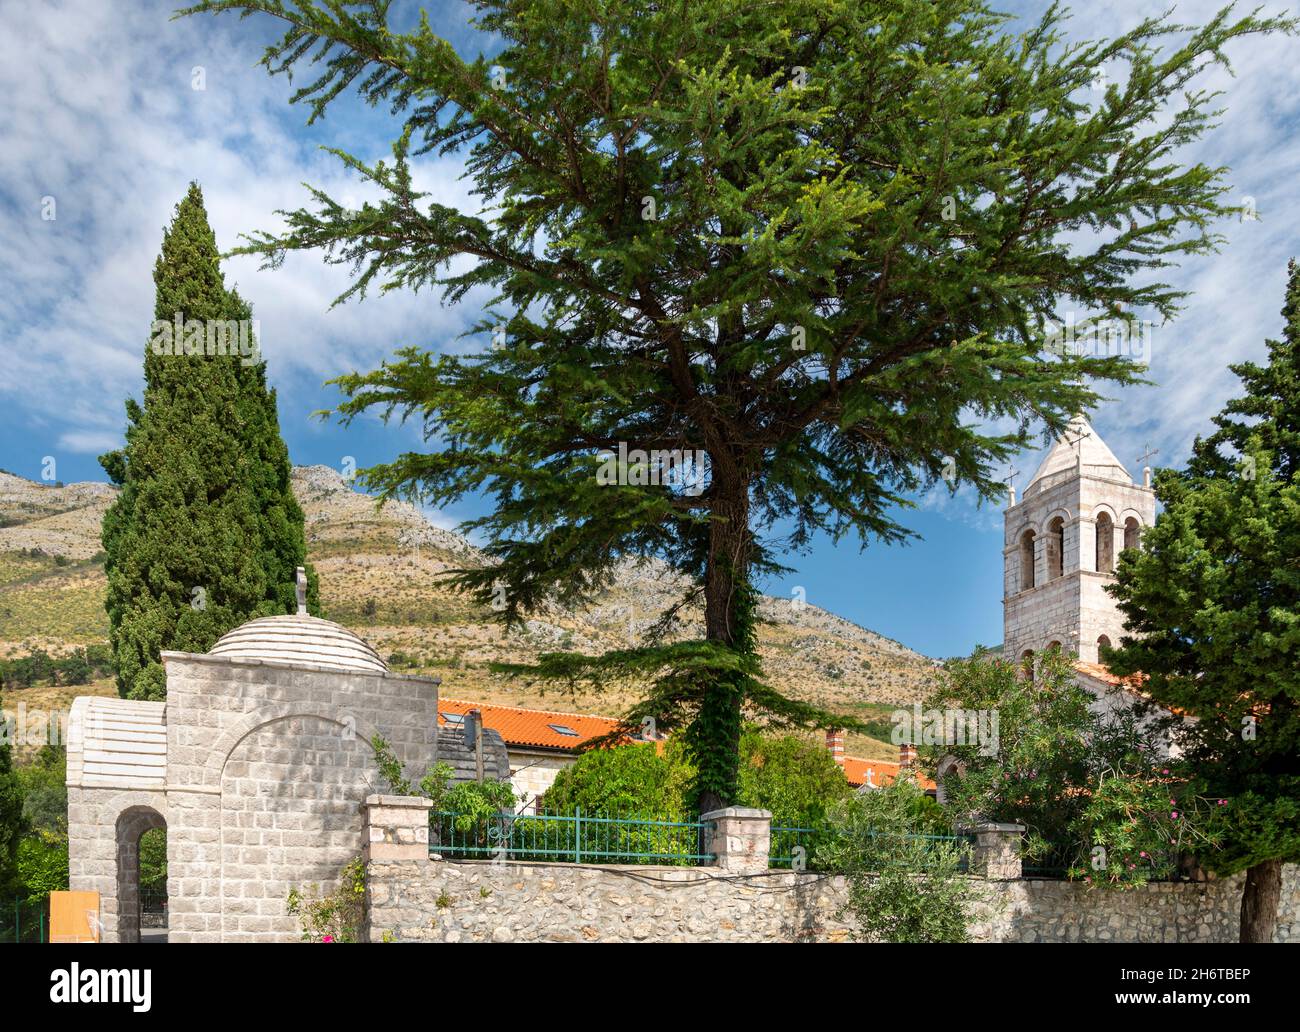 Small Serbian Orthodox style Church,surrounded by tall green trees inSeptember near Skadar Lake,in the mountains,with blue sky and wispy white clouds. Stock Photo